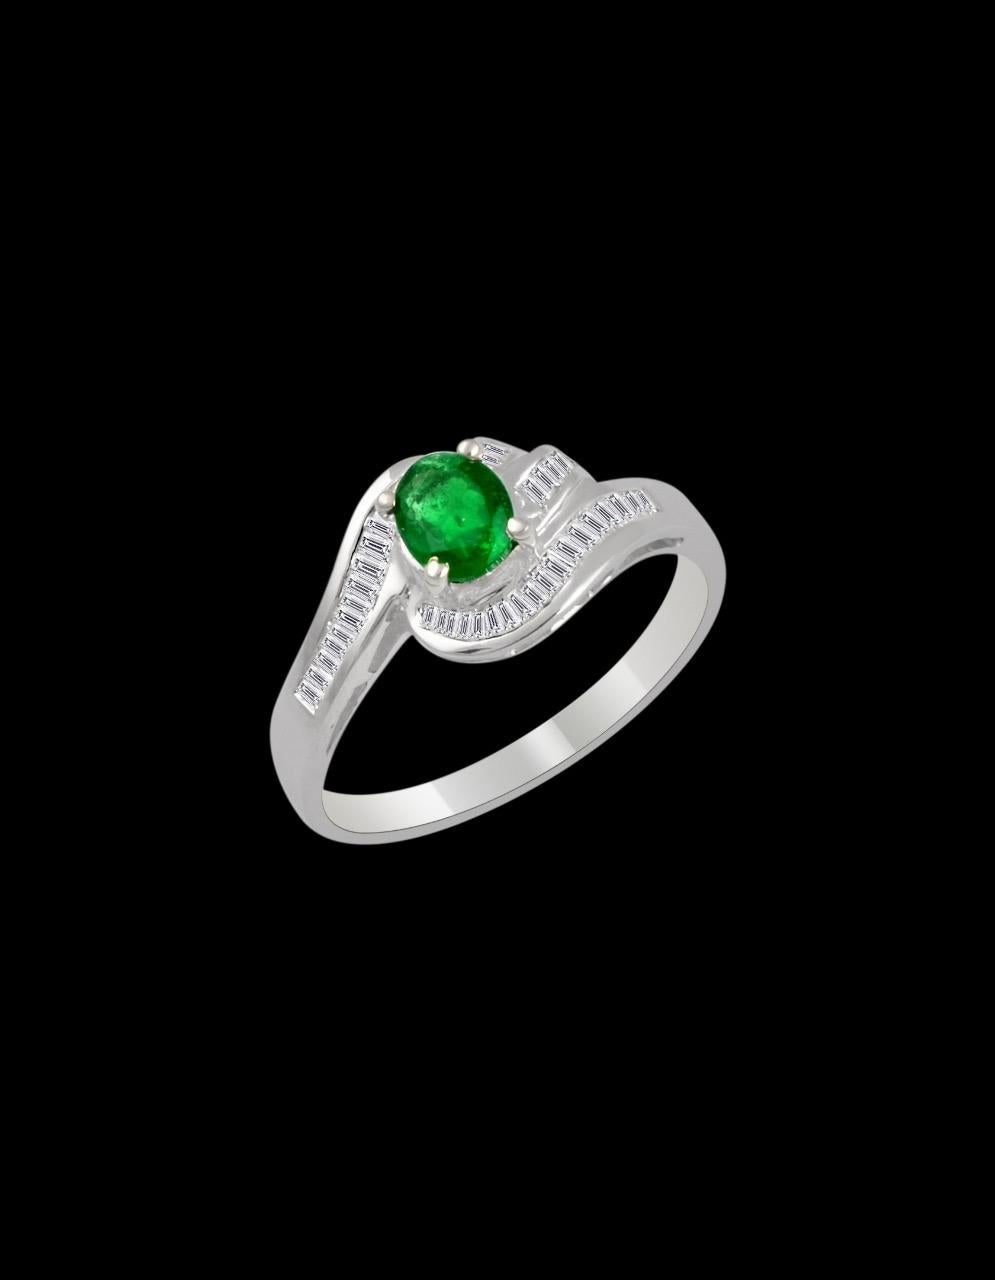 Extreme fine quality of emerald , small size but beautiful 
6 X 5 mm emerald , Oval in shape 
Intense green color, Beautiful stone with shine and luster 
Total Diamond weight Approximately 0.5 Ct
Setting is very nice 
 Emeralds are very precious ,